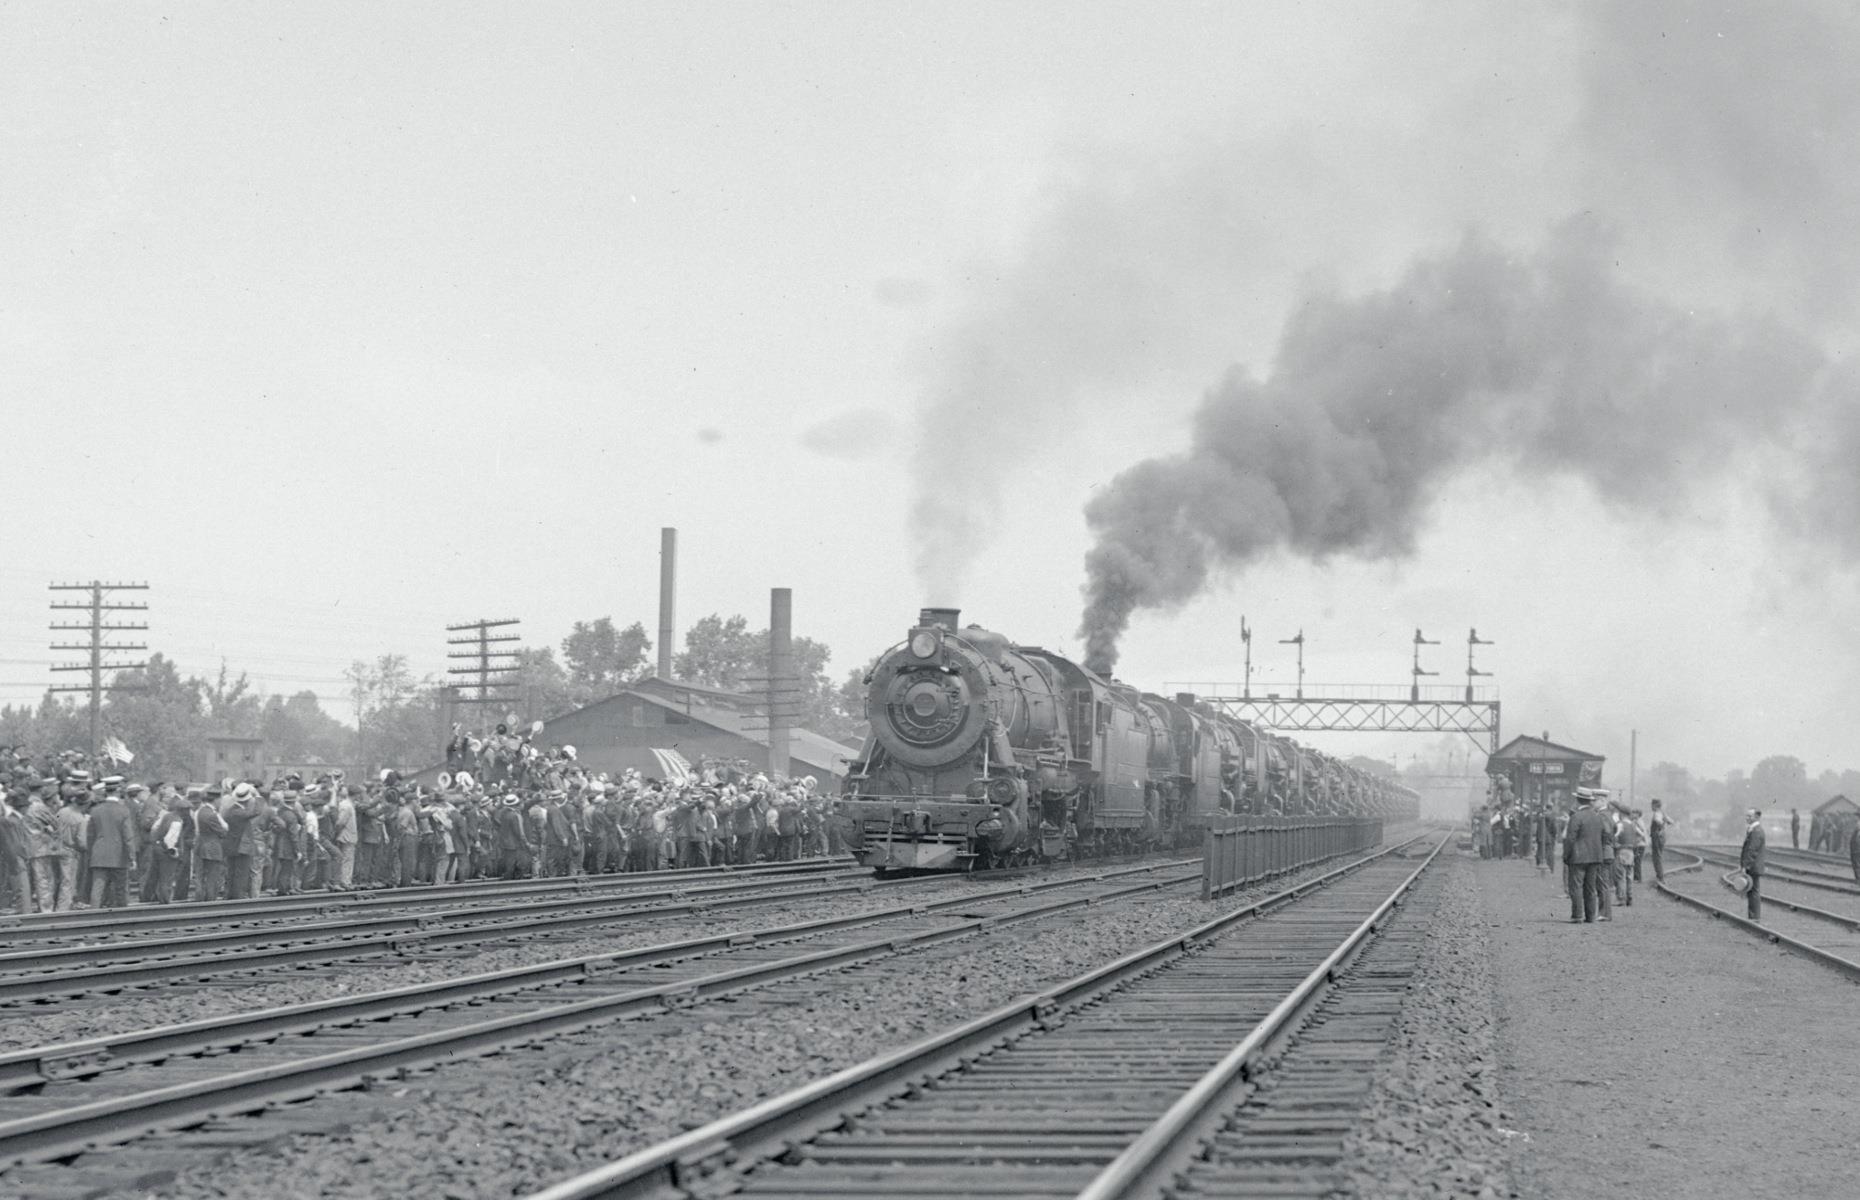 <p>The railway industry didn’t just prop up the American economy by transporting passengers and goods – it employed millions of Americans too, both on the railroads themselves and in allied industries. By 1906 the Baldwin Locomotive Works (pictured here some years later) employed 17,000 people working round-the-clock shifts and had the capacity to produce 2,500 new locomotives a year.</p>